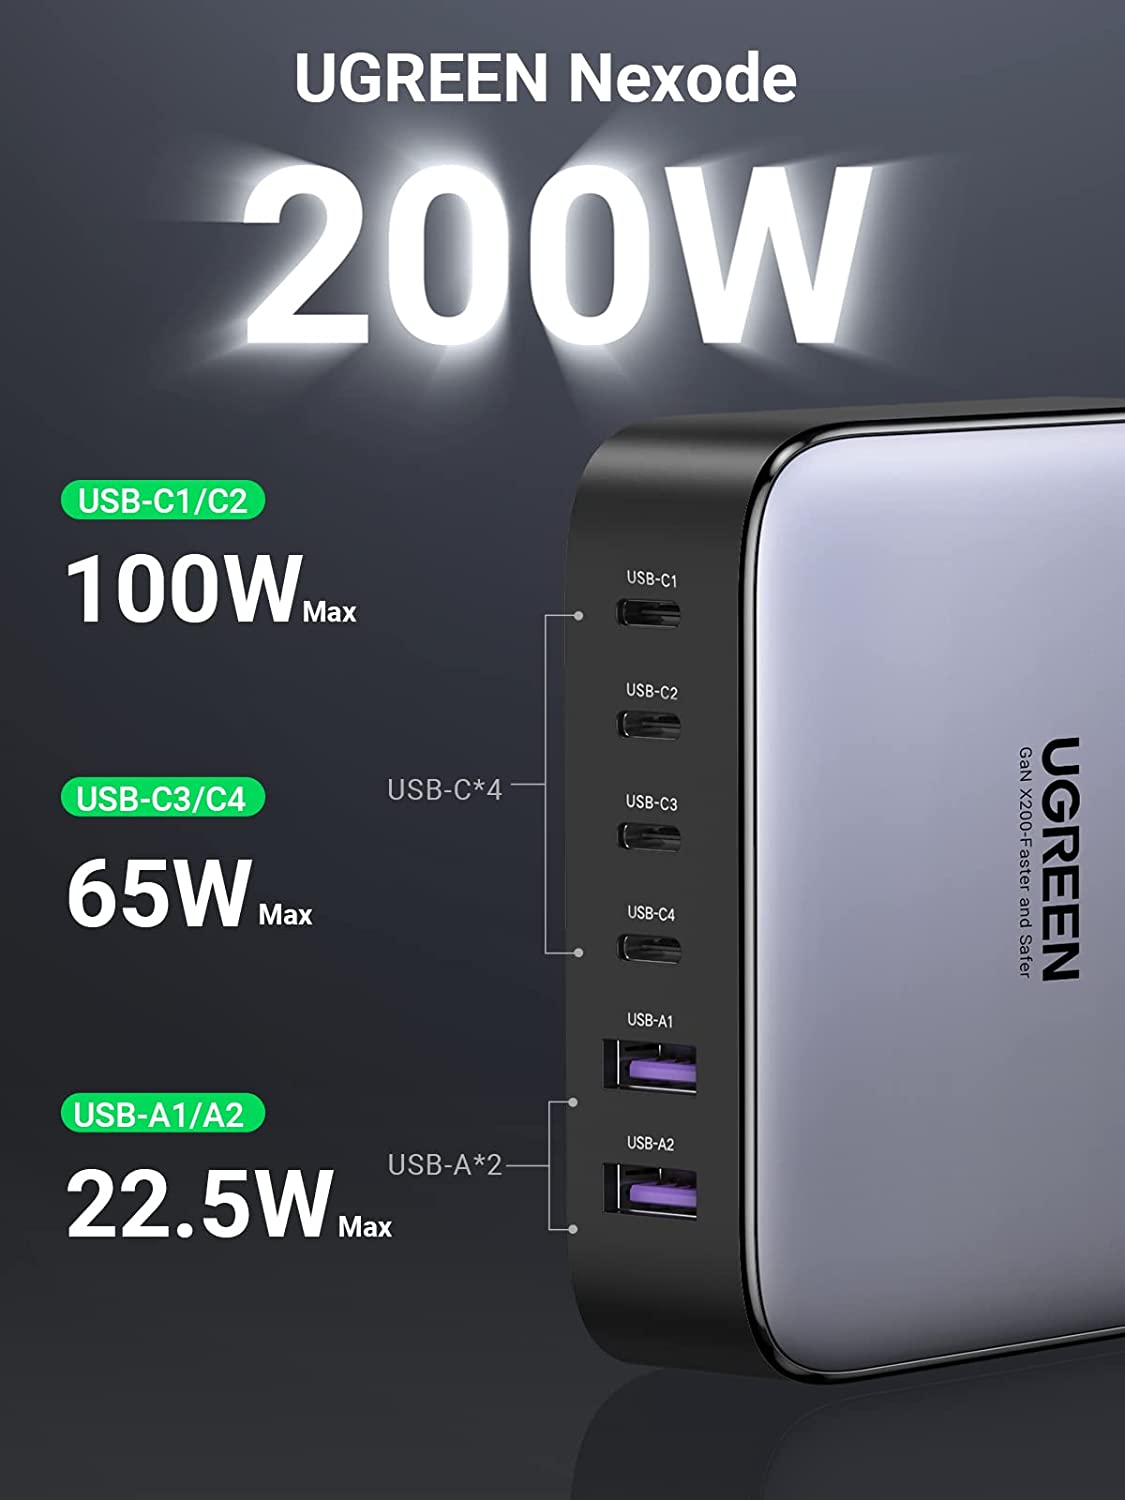 UGREEN 200W USB C Charger, Nexode 6 Ports GaN Desktop Charger, Charging  Station Compatible with MacBook Pro/Air M1 M2, iPad Pro/Air, iPhone 15 Pro